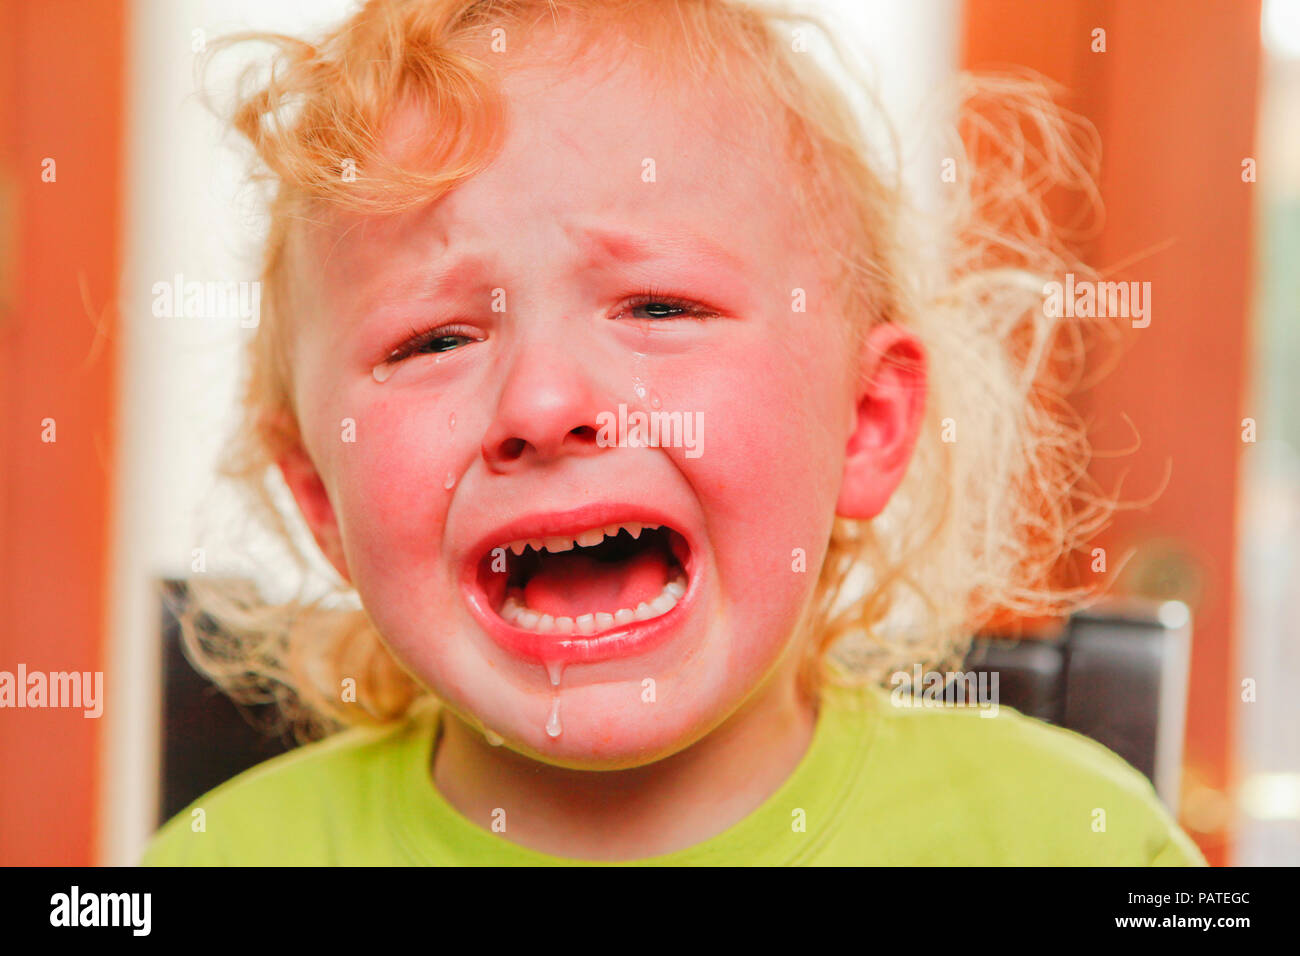 Crying child with curly red hair Stock Photo